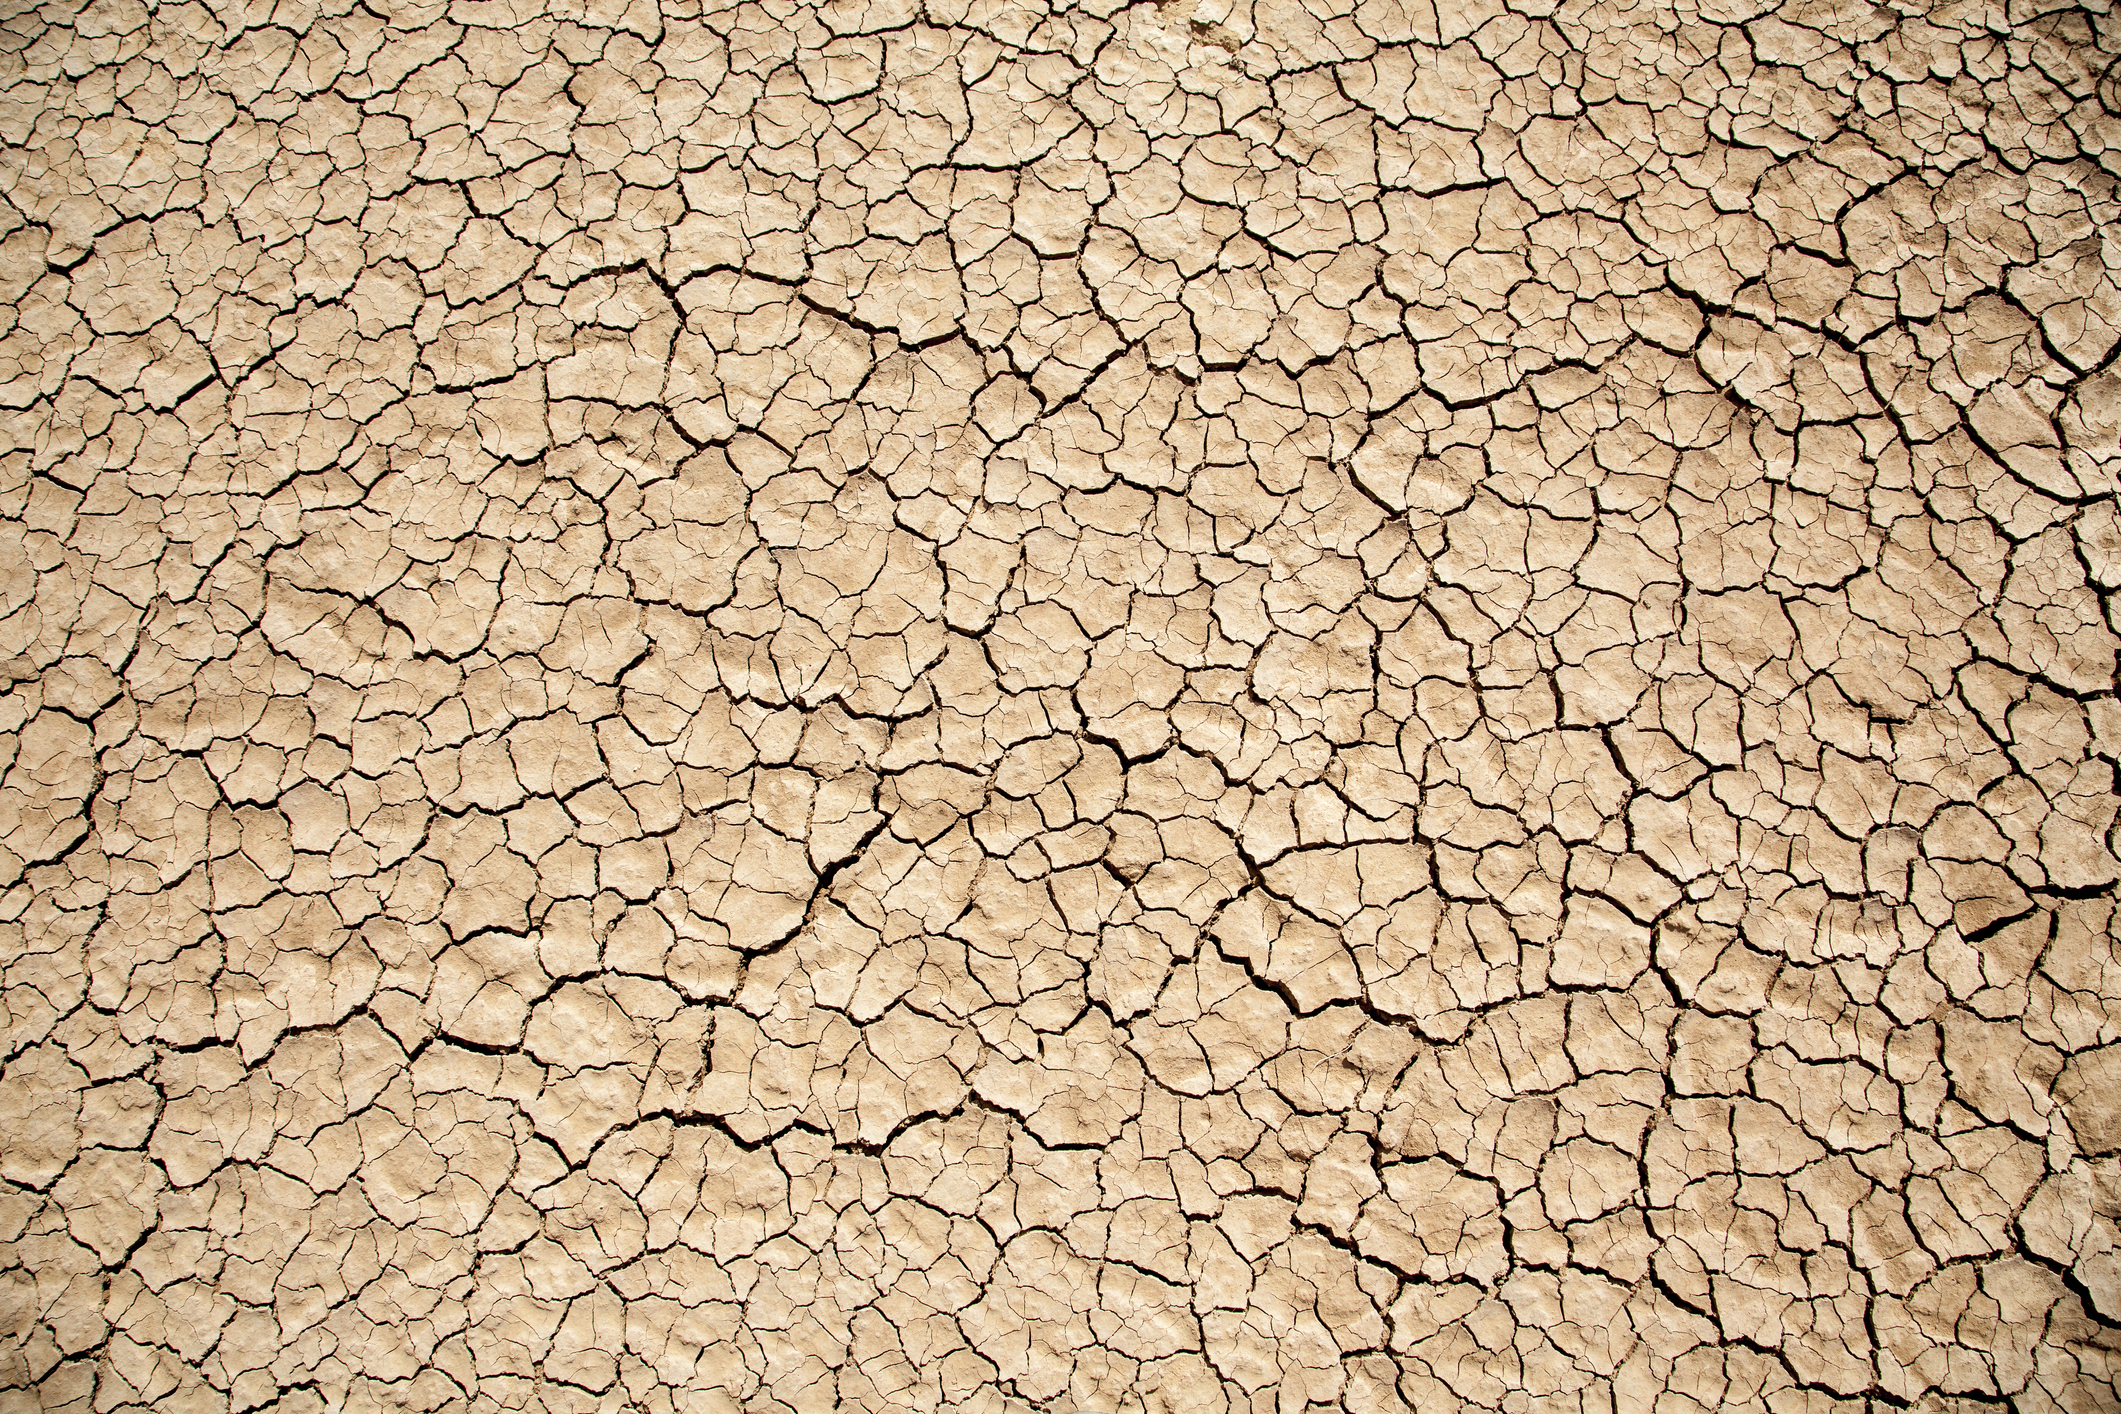 What is the driest desert in the world? The 10 driest ranked